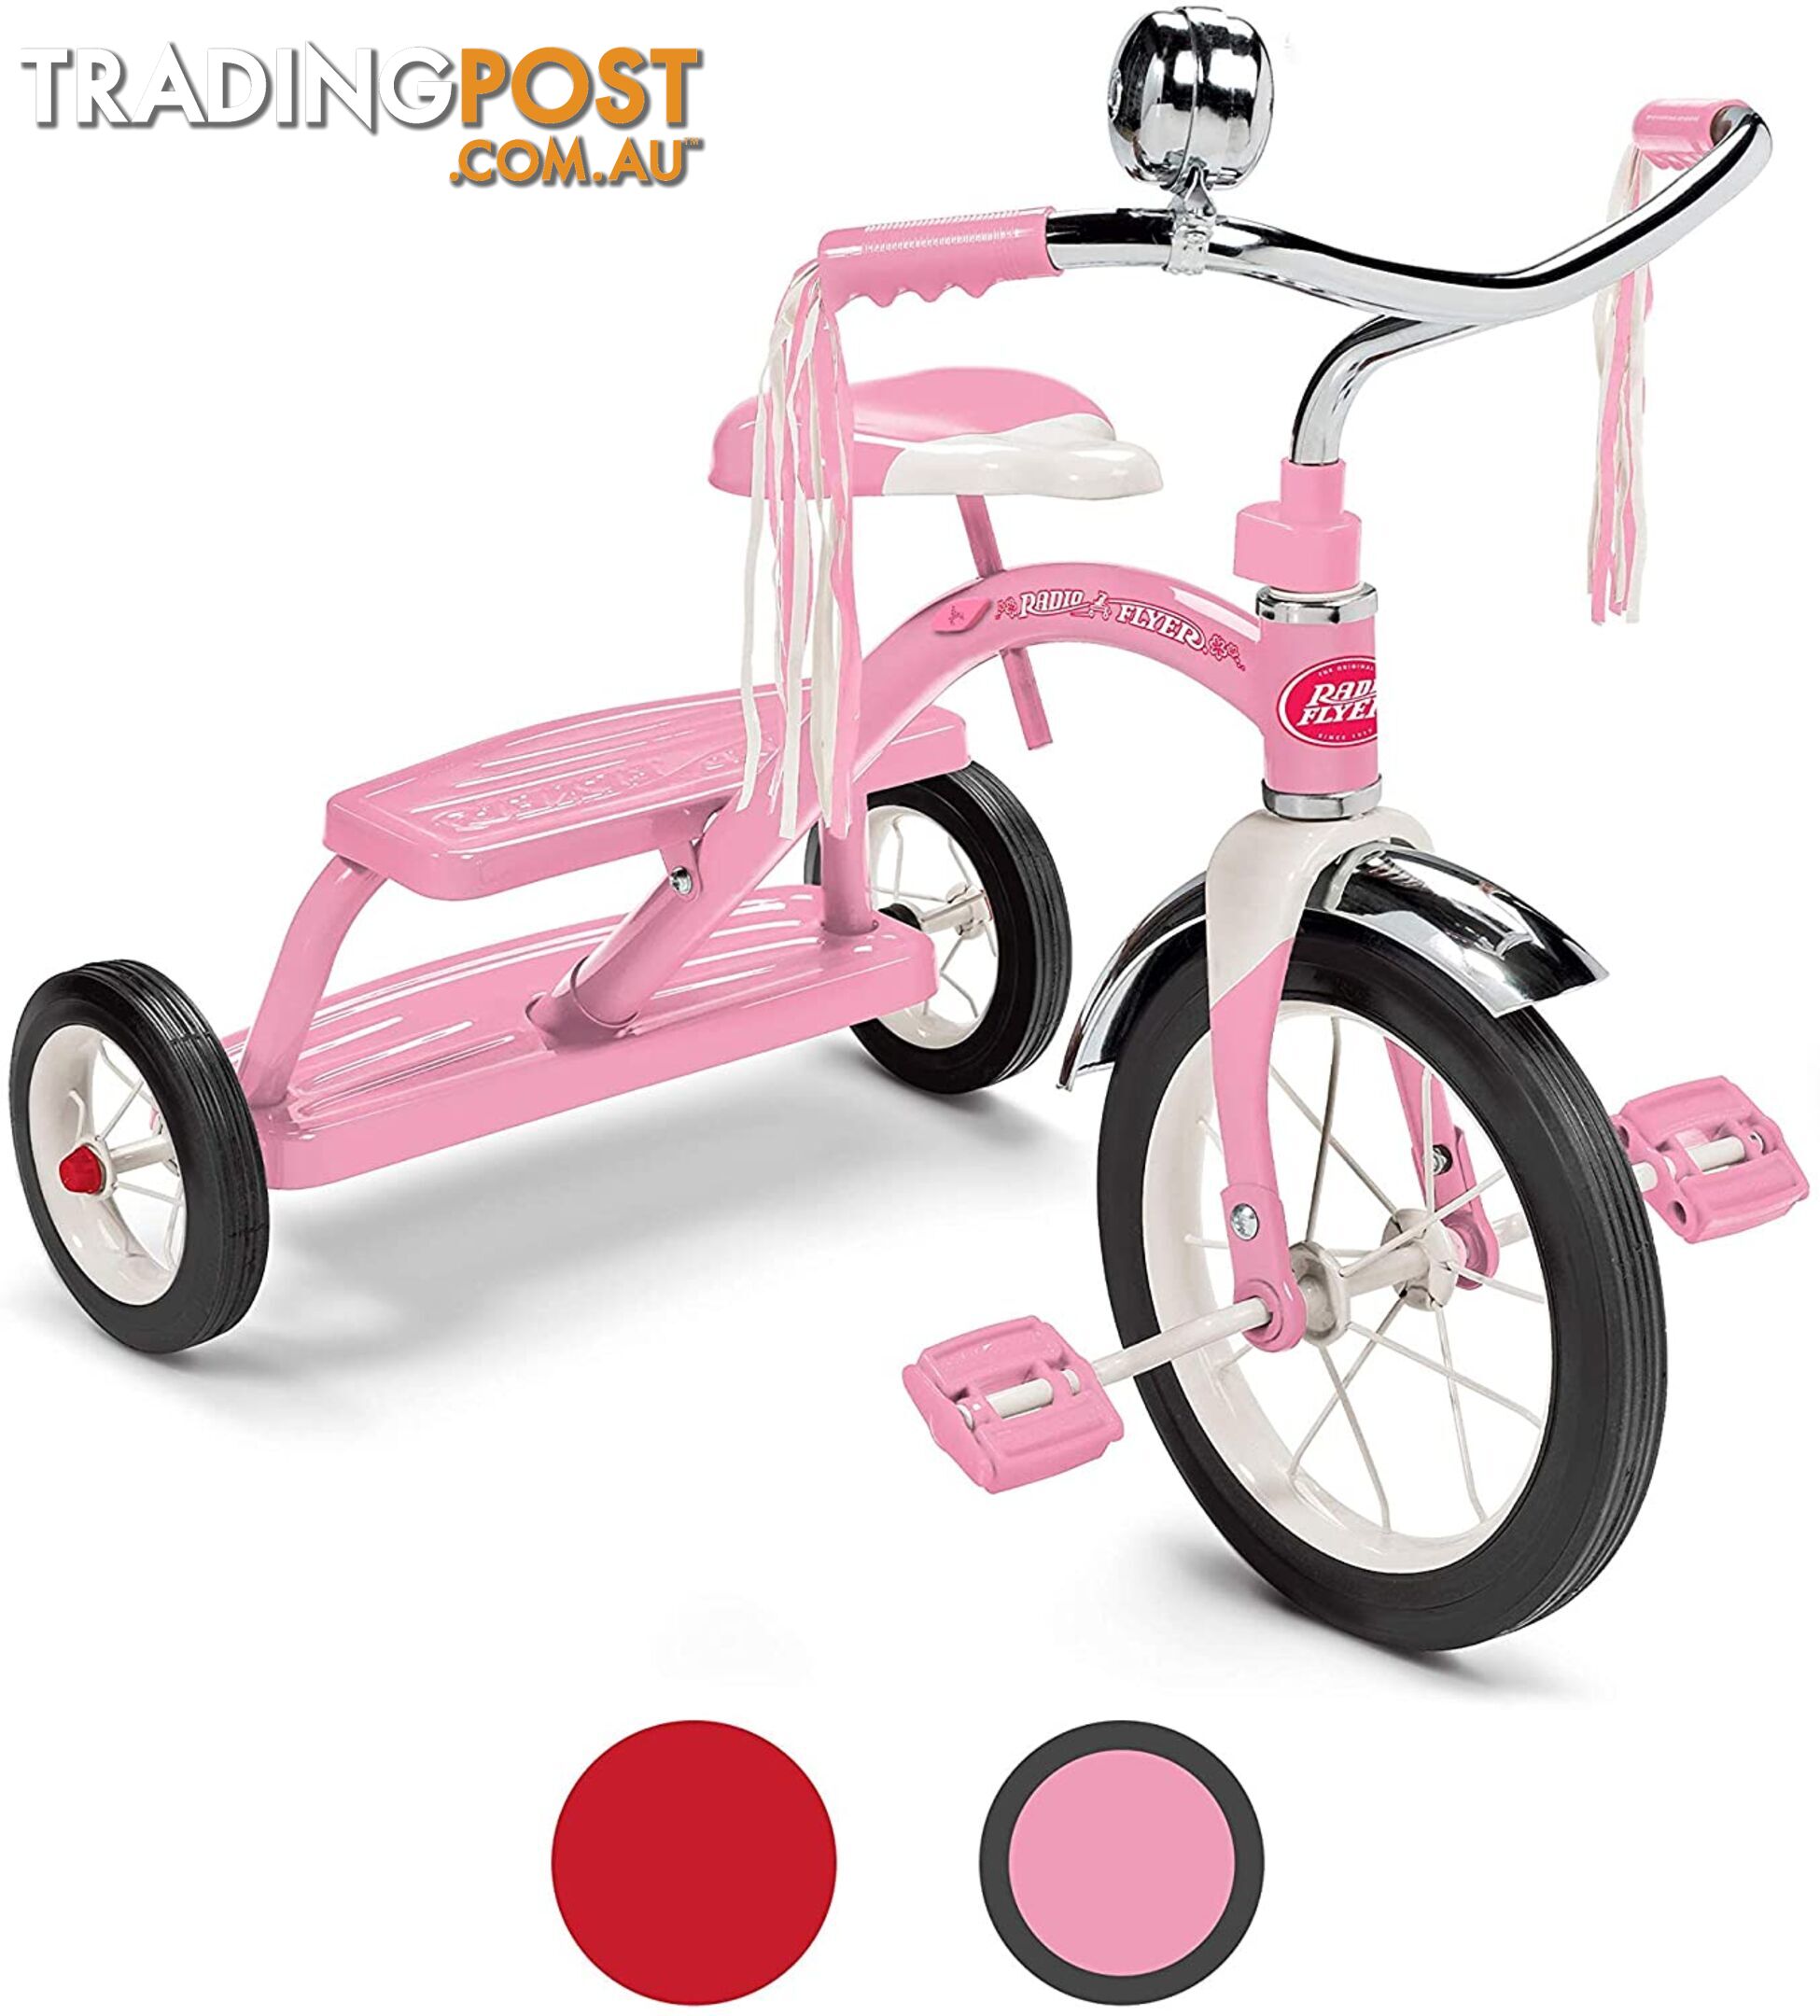 Radio Flyer - Classic Pink Dual Deck Tricycle Art65041 - 0042385112800